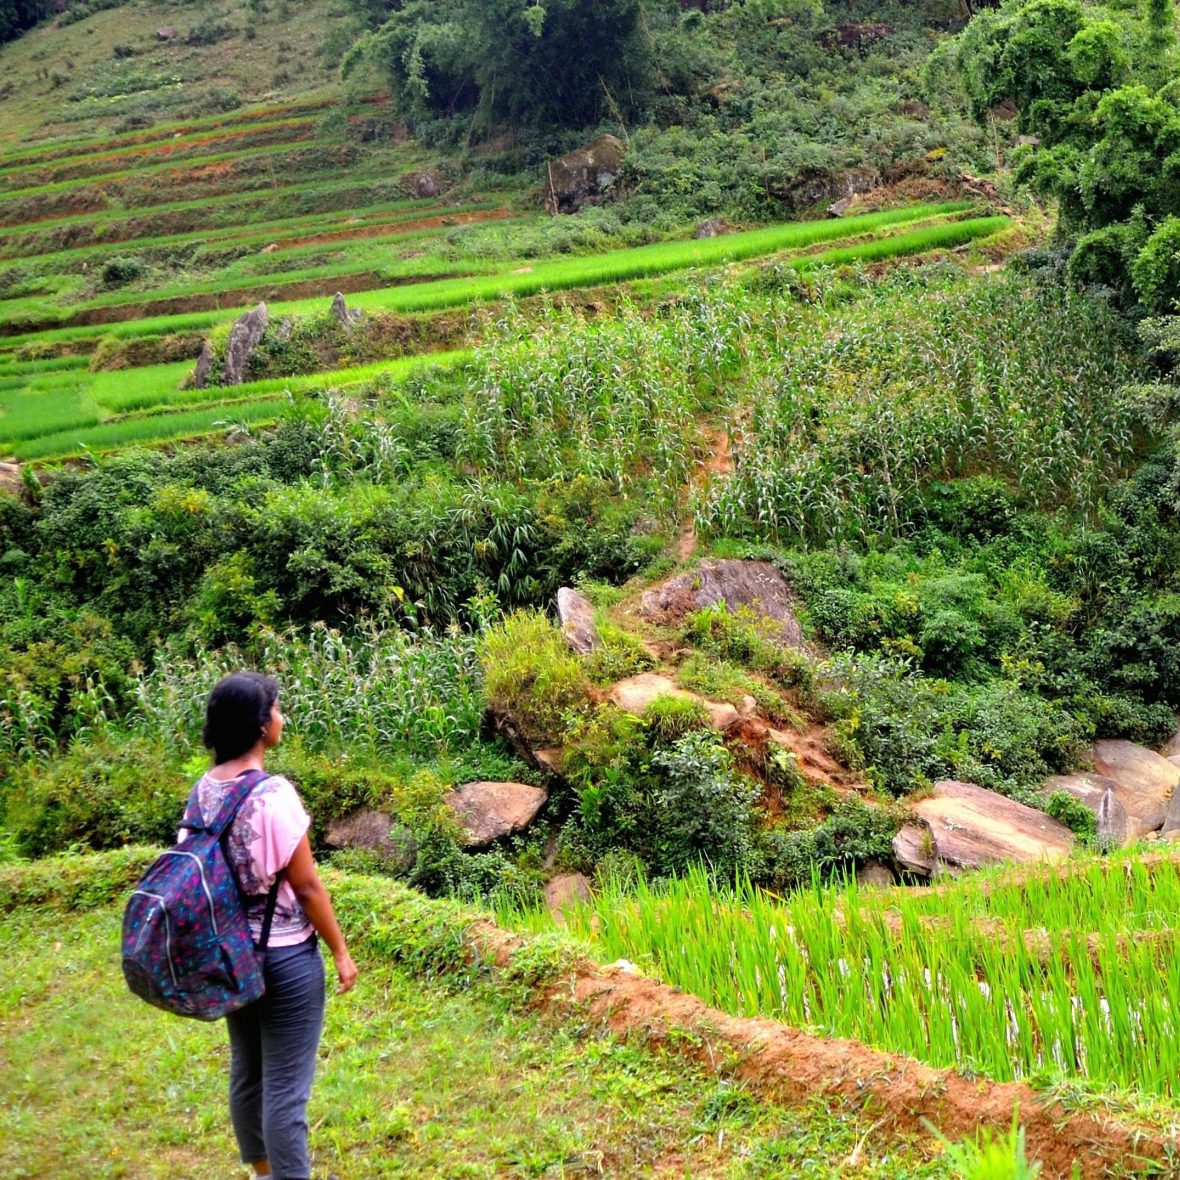 Kamelia Kiawan stands in bottom left, wearing a big backpack, looking out at a verdant green landscape